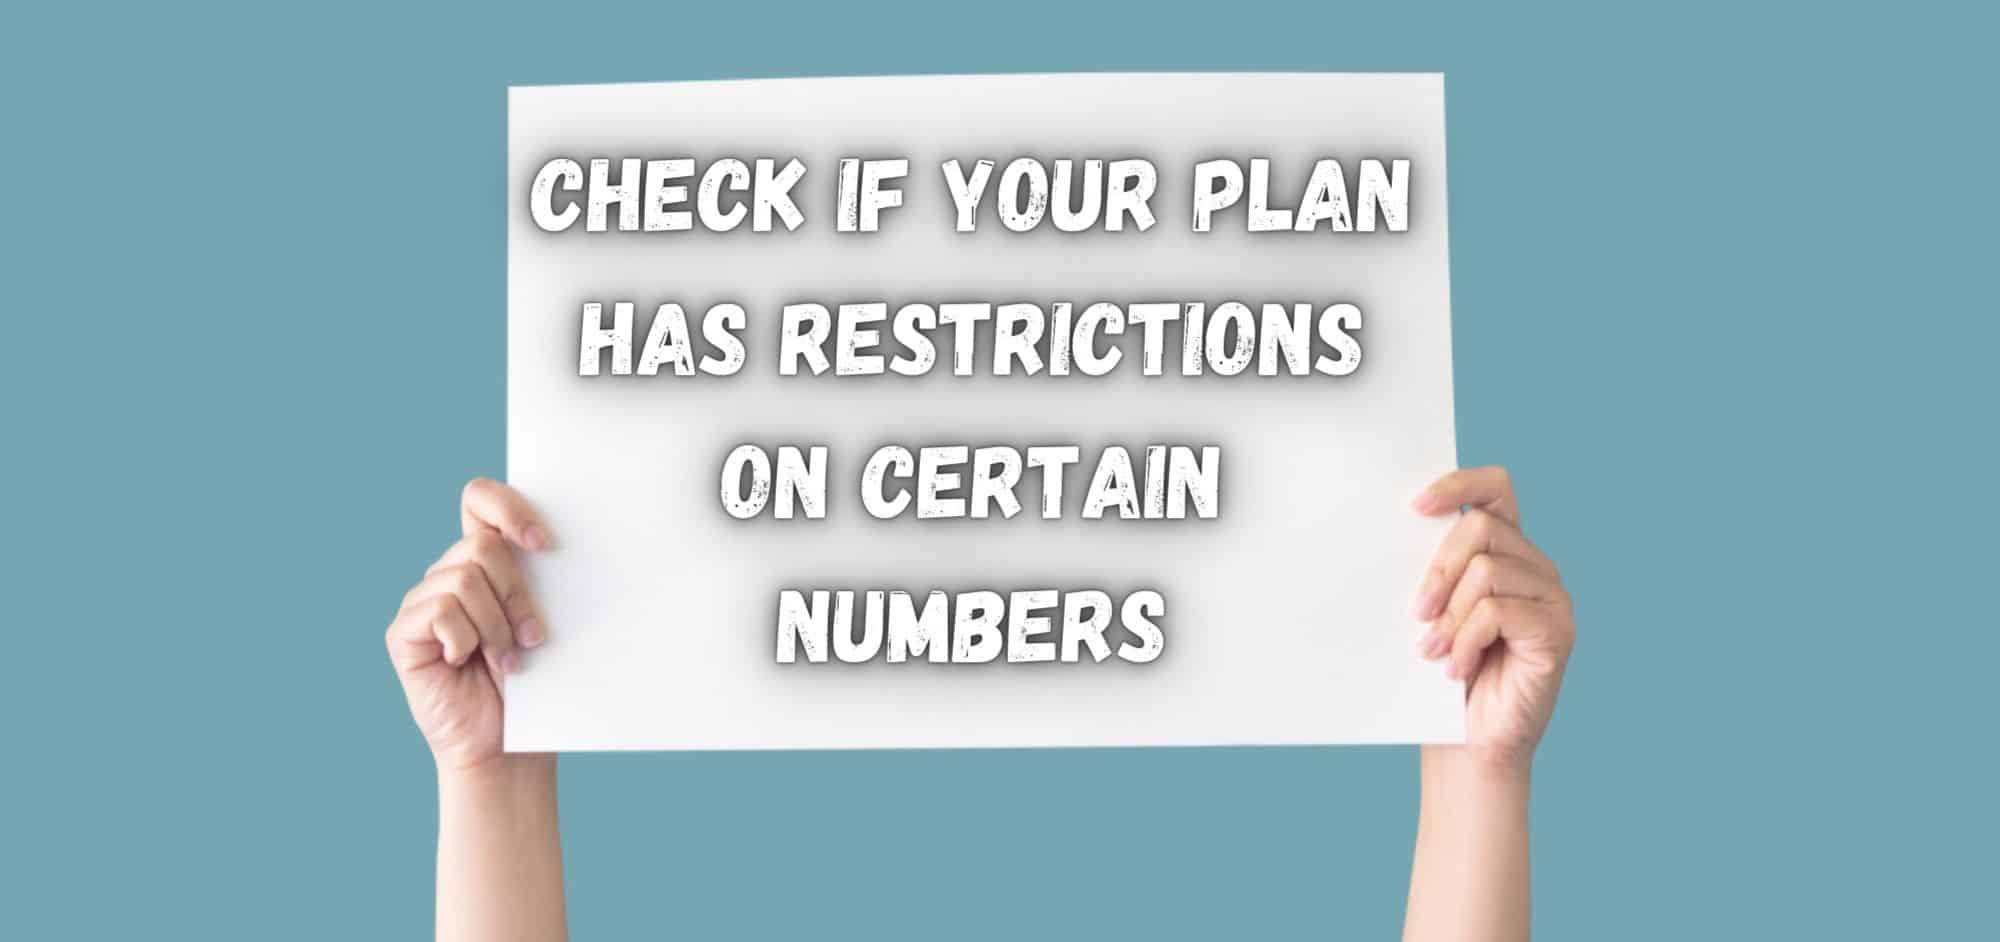 Check if Your Plan Has Restrictions on Certain Numbers